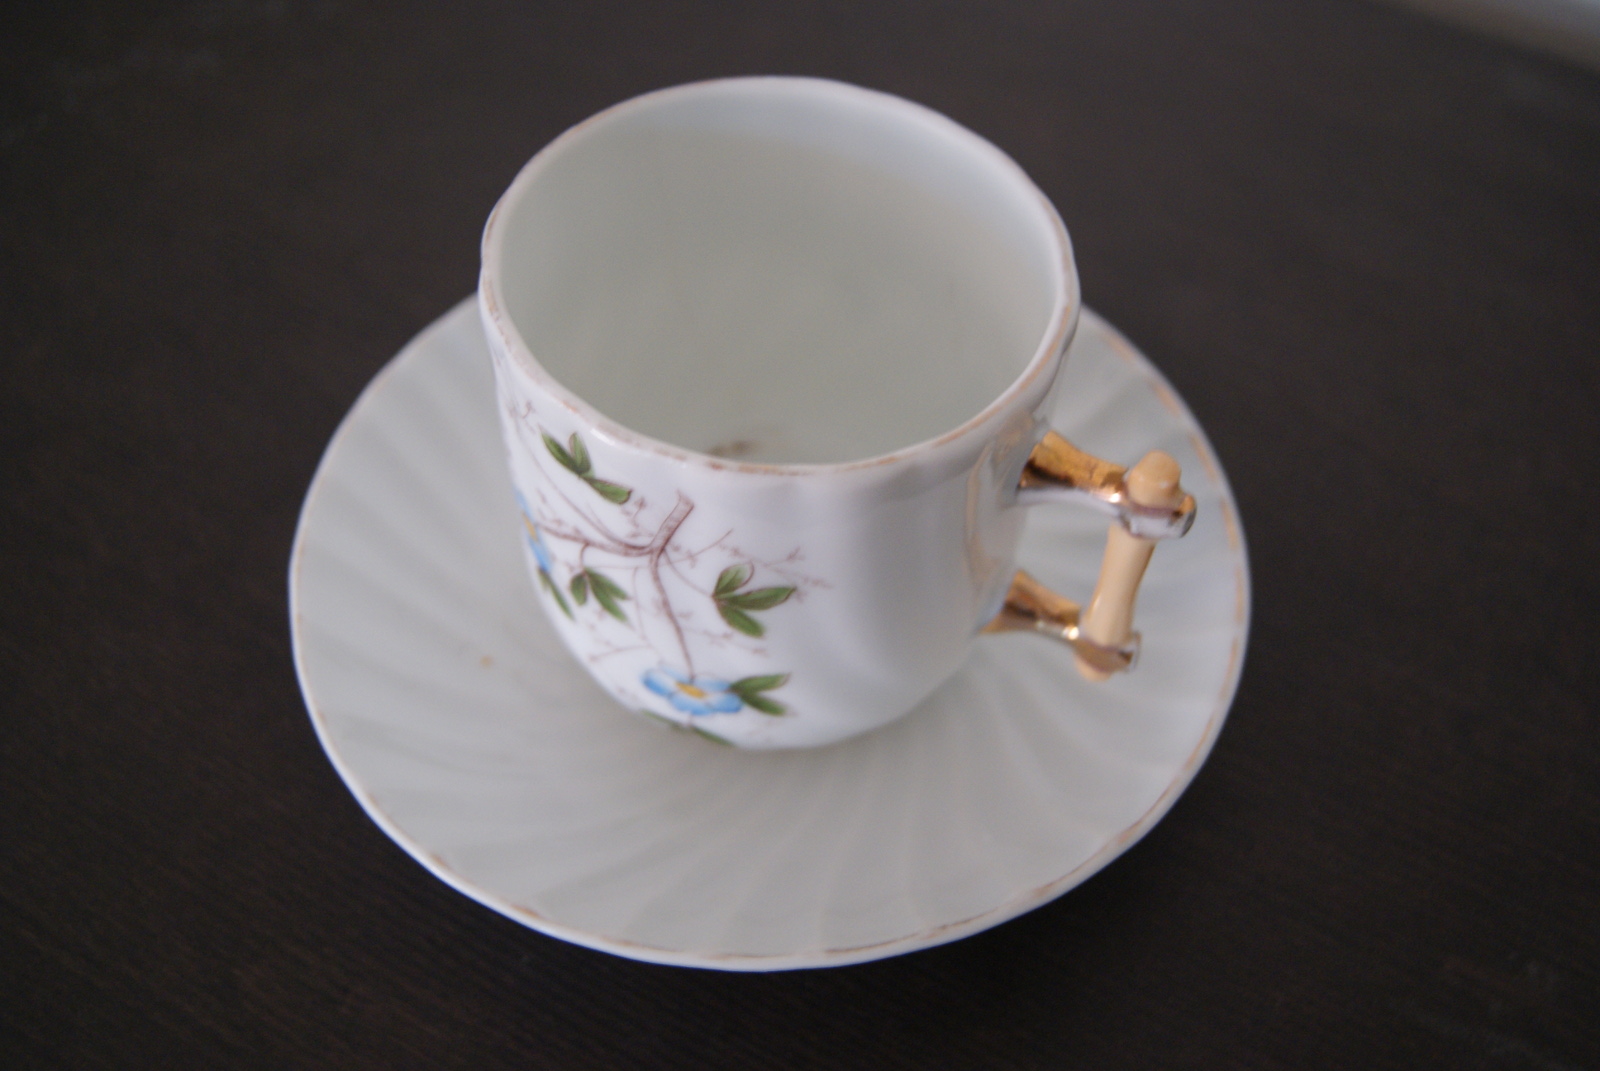 Porsgrund coffee cup with blue flowers, leaves and with handle like a stick